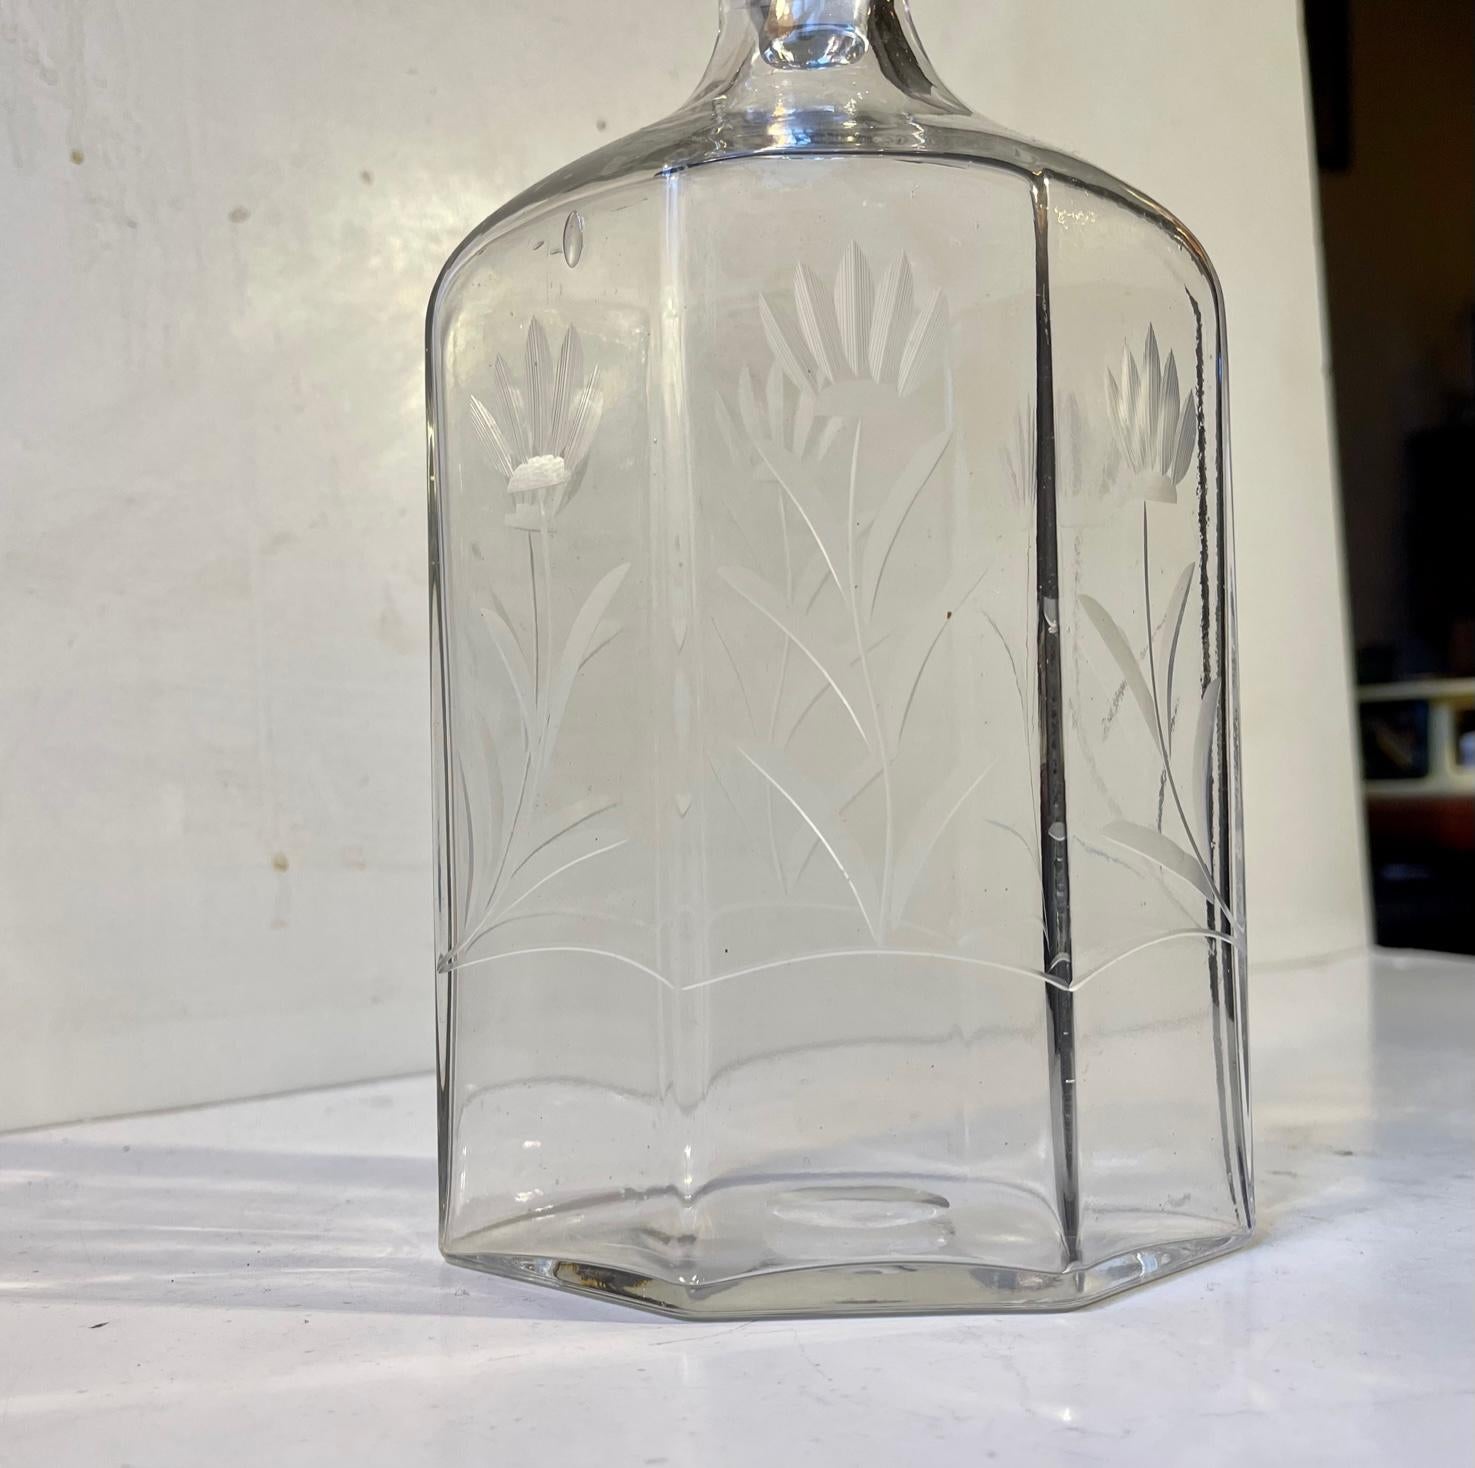 Stylistically strict Art Deco decanter in a hexagonal shape. Its hand-blown in to a mould from clear glass and has hand-etched flowers to all 6 sides and the stopper. Made at Holmegaard Glasværk in Denmark circa 1930-40. Measurements: H: 27 cm, W/D: